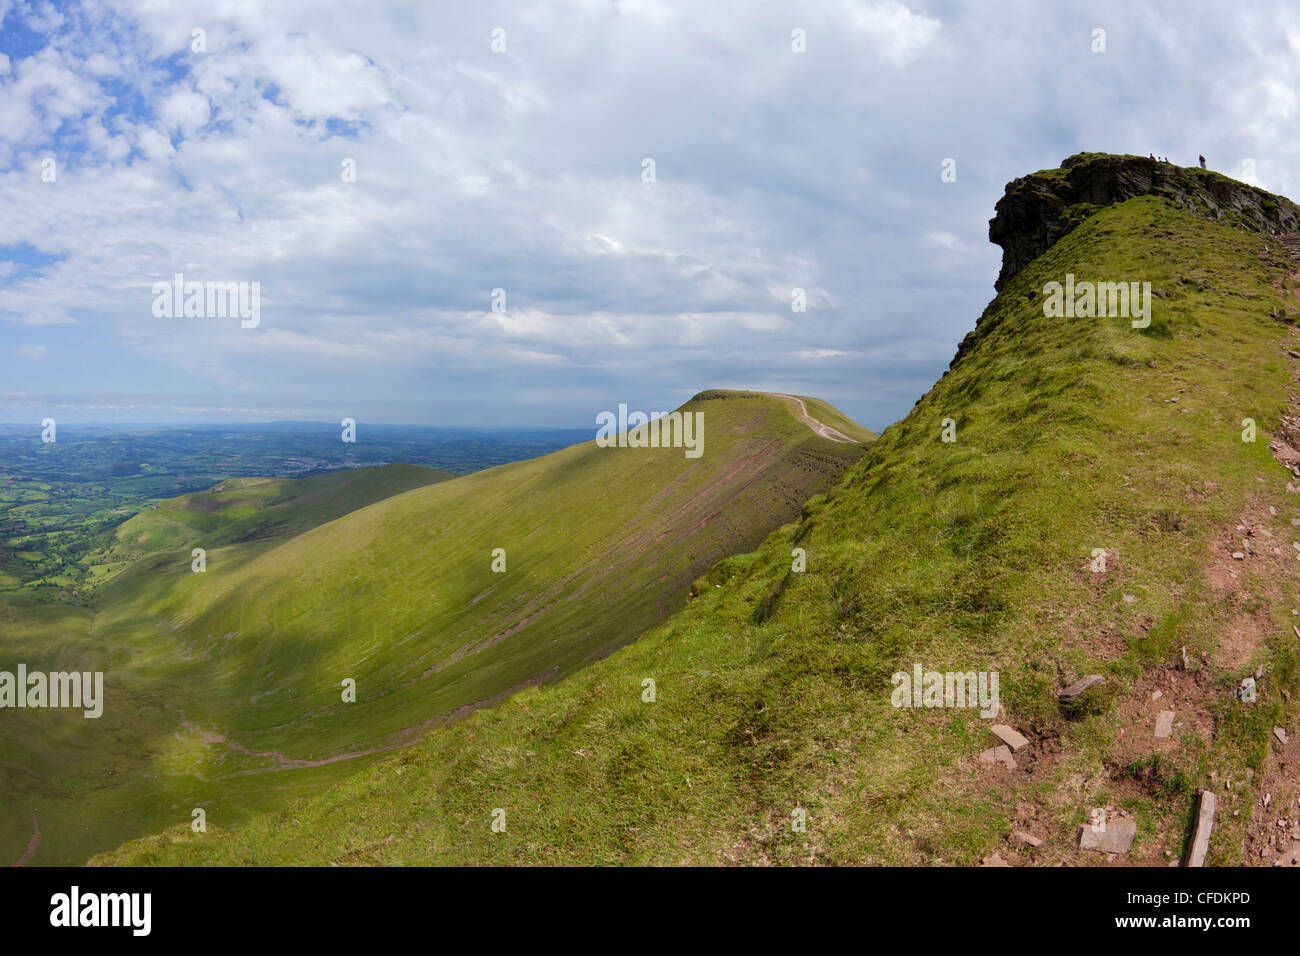 Walkers on Pen-y-Fan in spring sunshine, Brecon Beacons National Park, Powys, Wales, United Kingdom, Europe Stock Photo